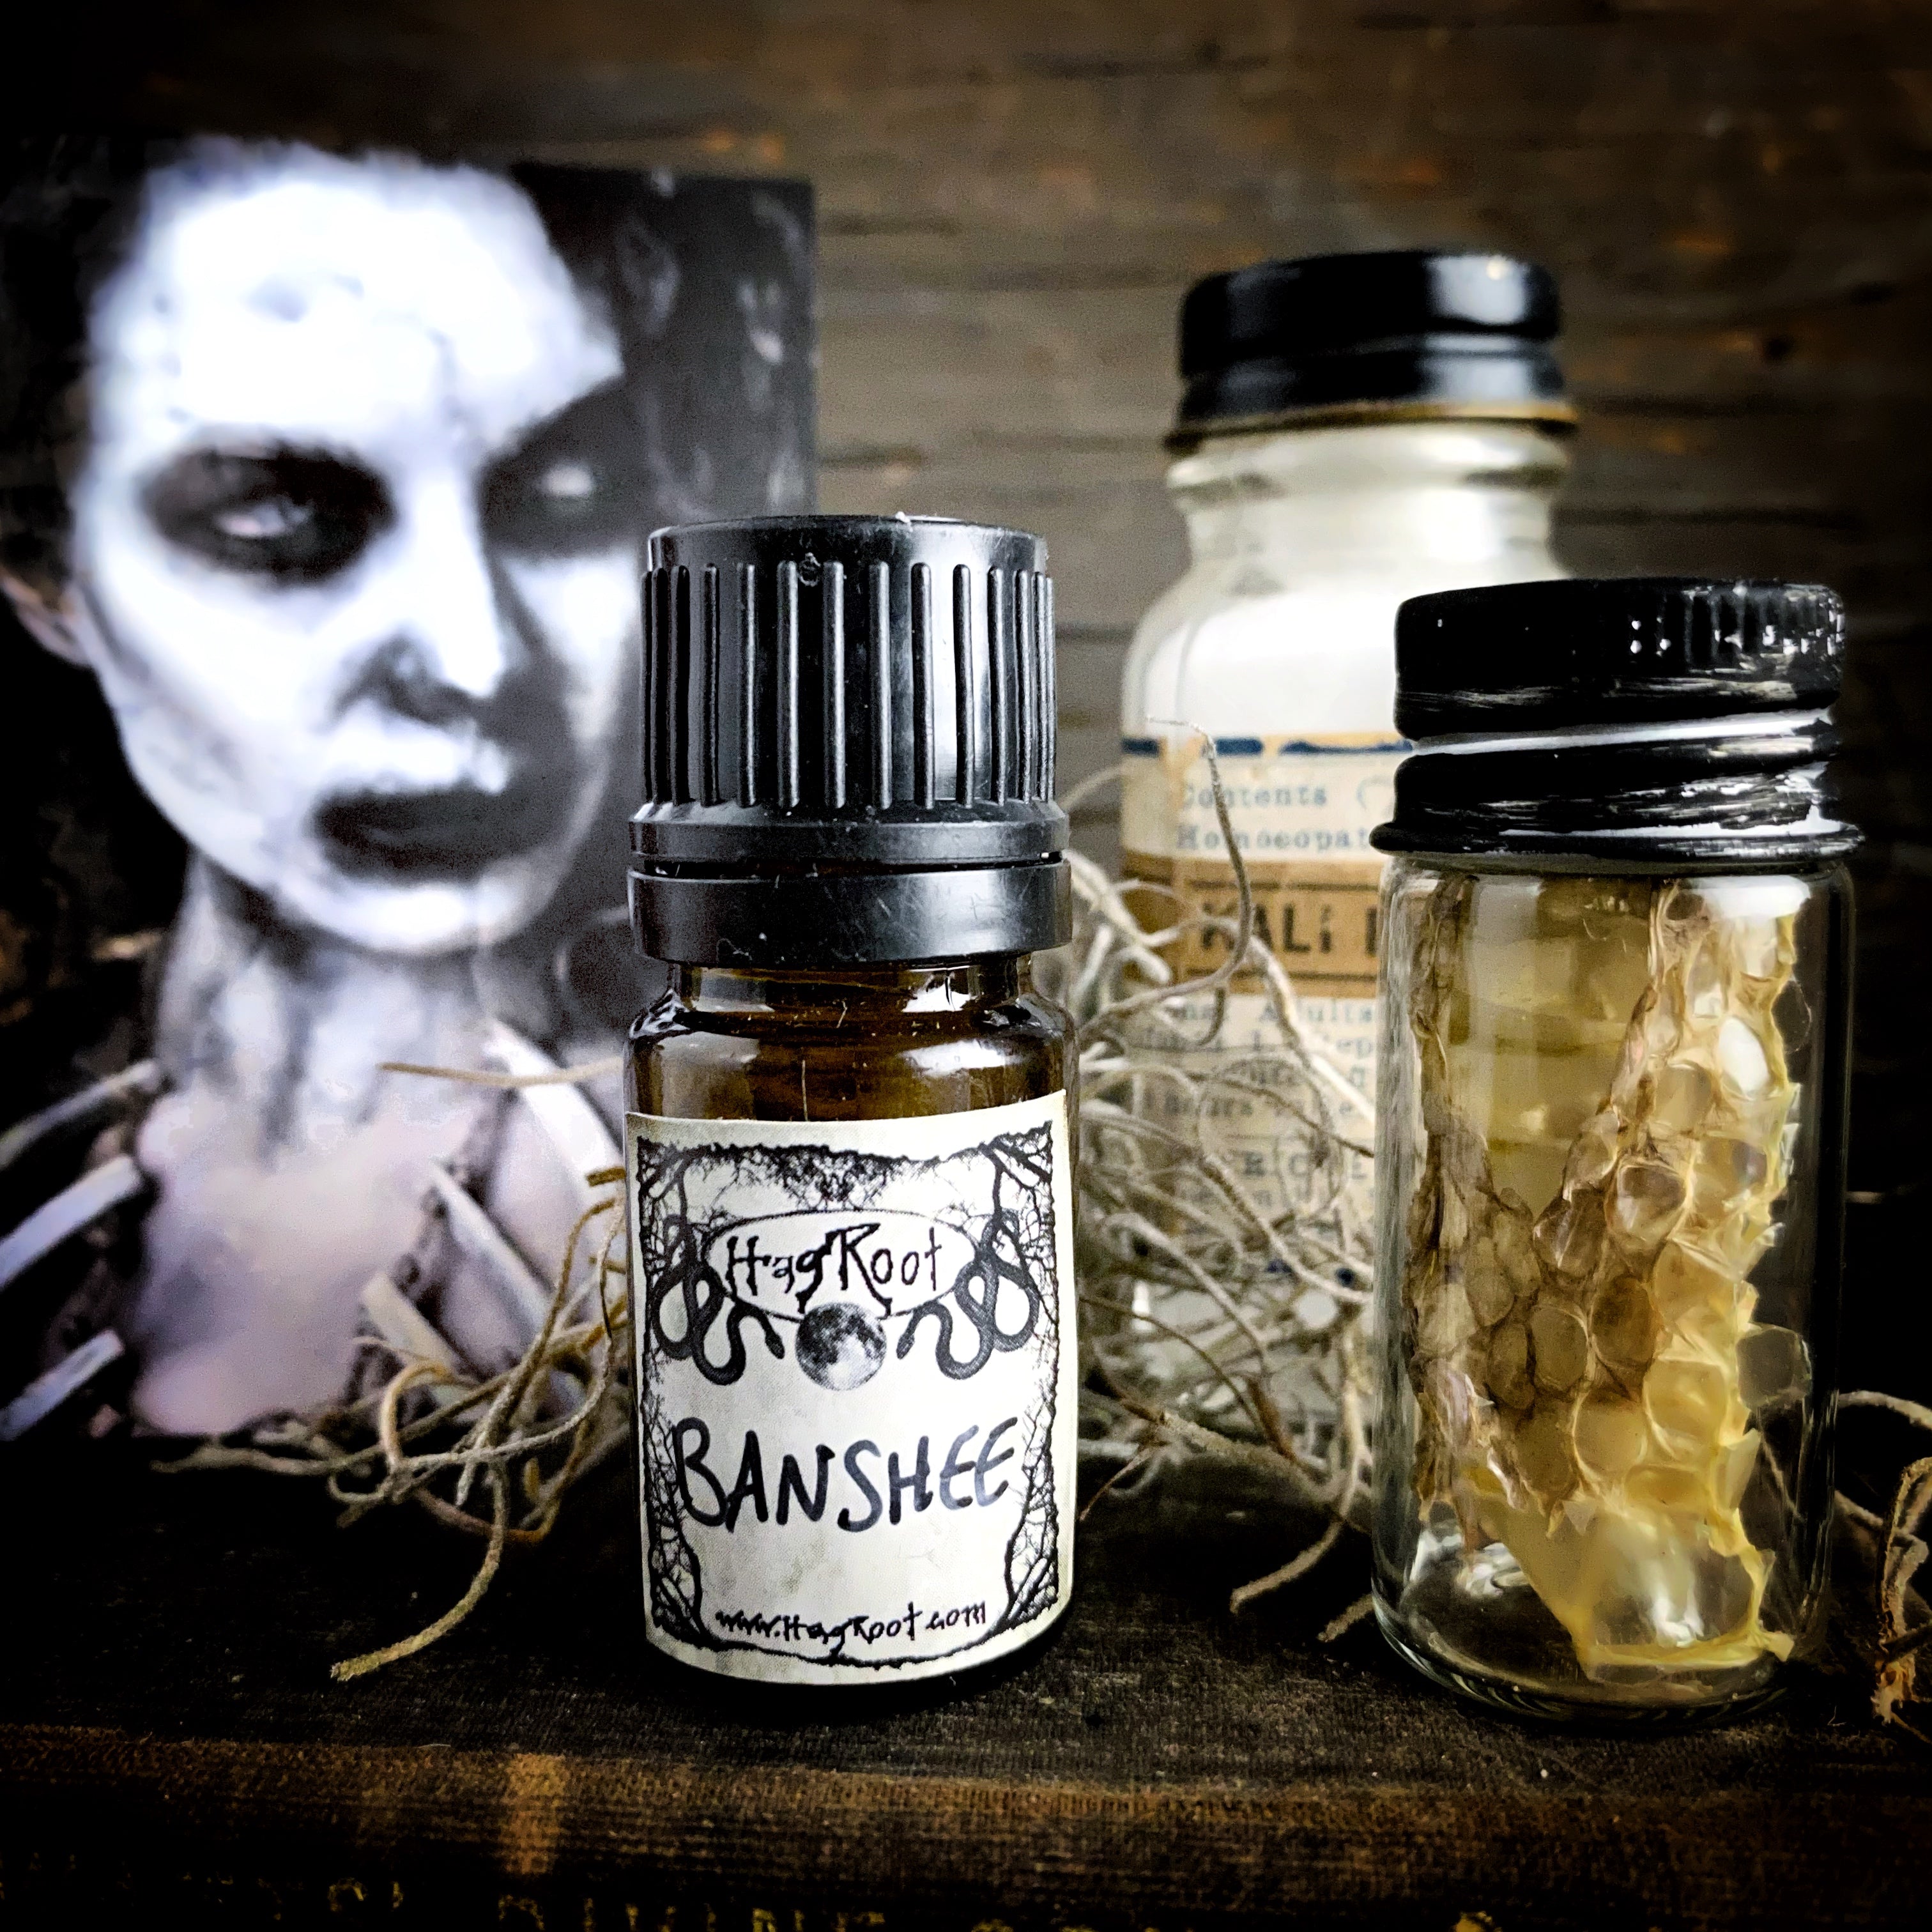 BANSHEE-(Sacred Spices, Dark Cacao, Musk, AgarWood, Amber Resin, Fig)-Perfume, Cologne, Anointing, Ritual Oil